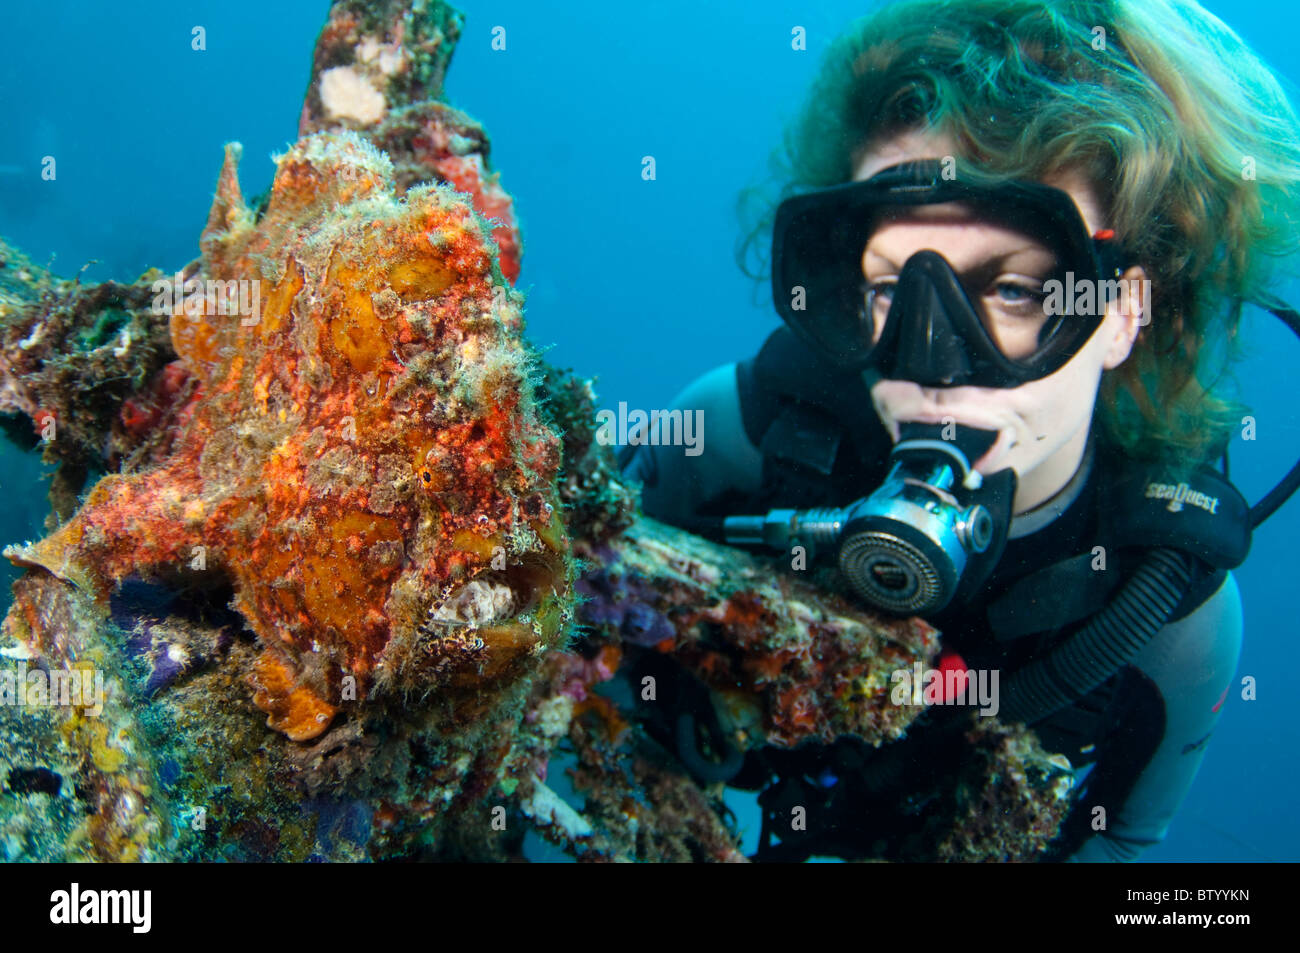 Diver looking at a Giant Frogfish, Antennarius commerson, on top of a manmade reef structure, Mabul, Sabah, Malaysia Stock Photo